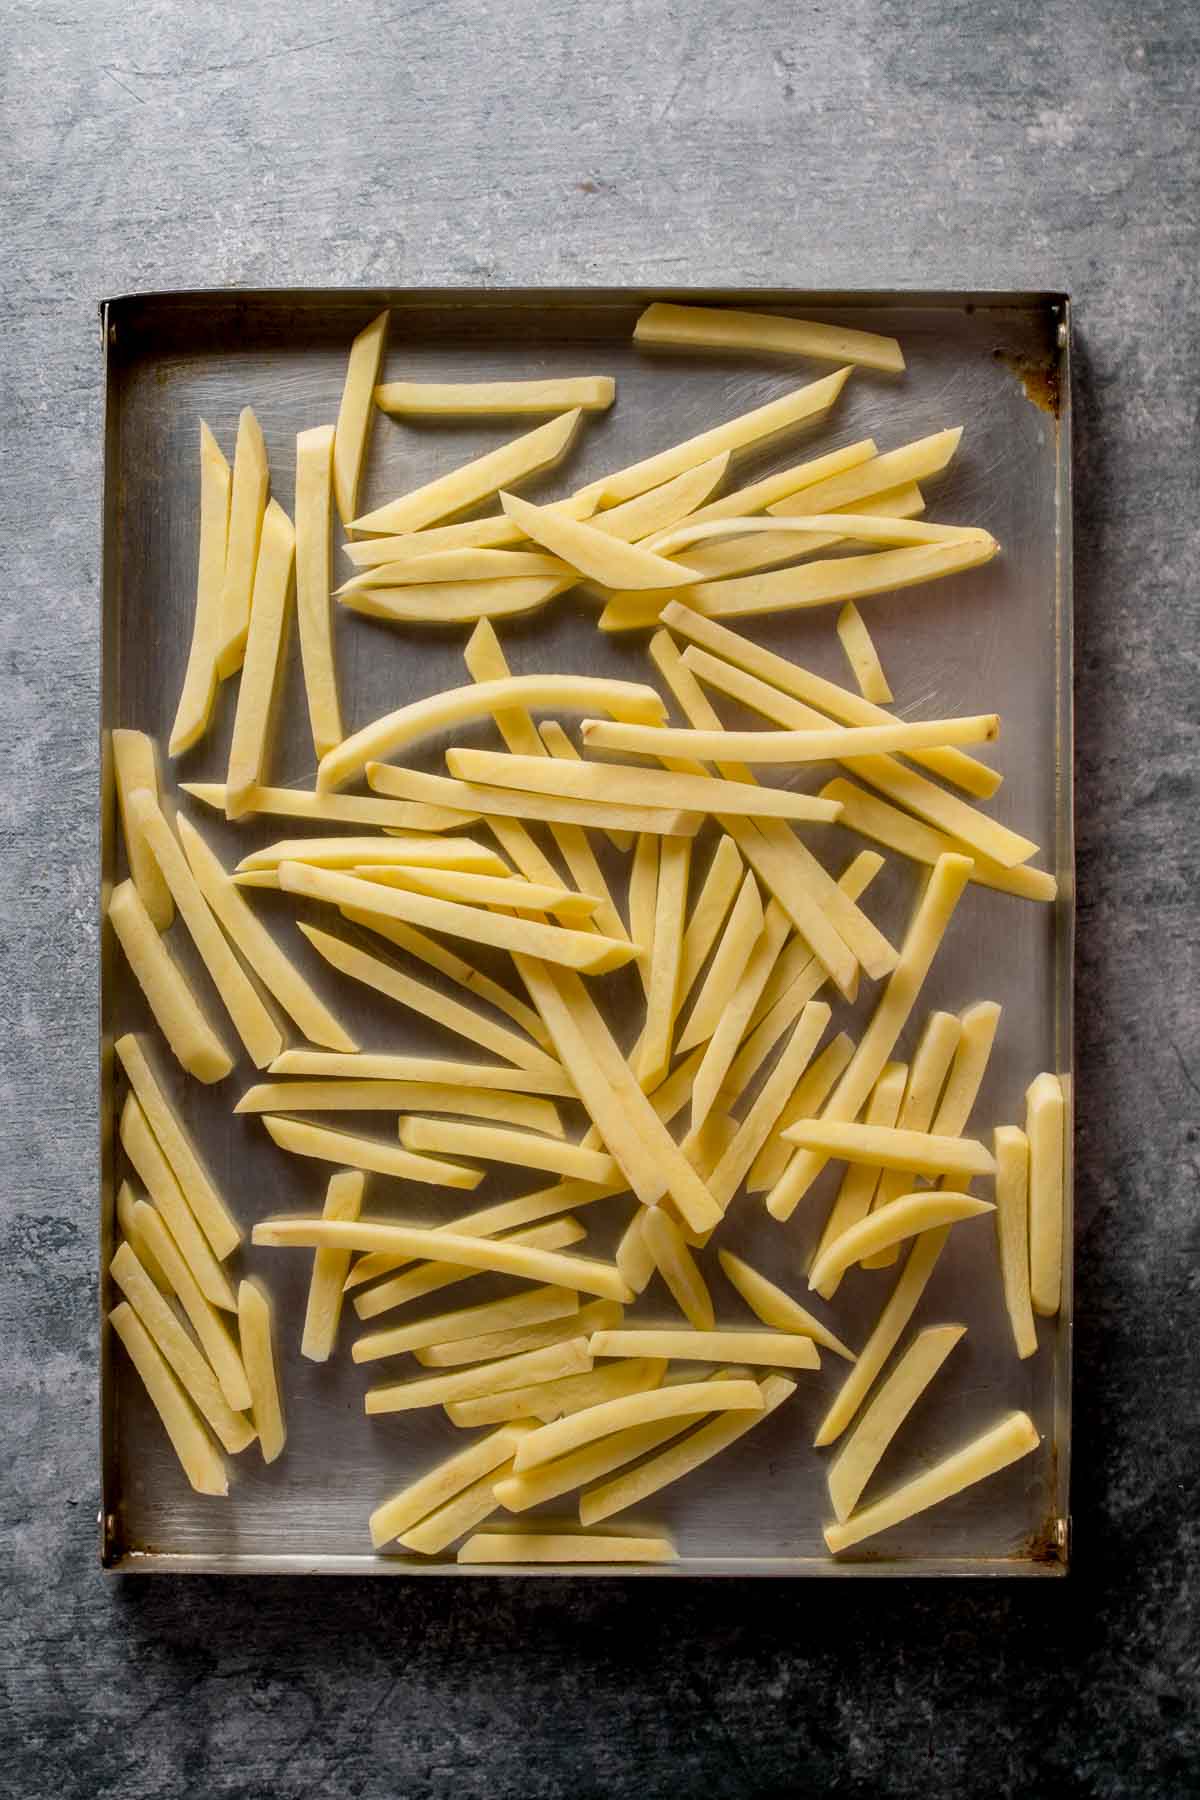 Uncooked french fries on a baking sheet